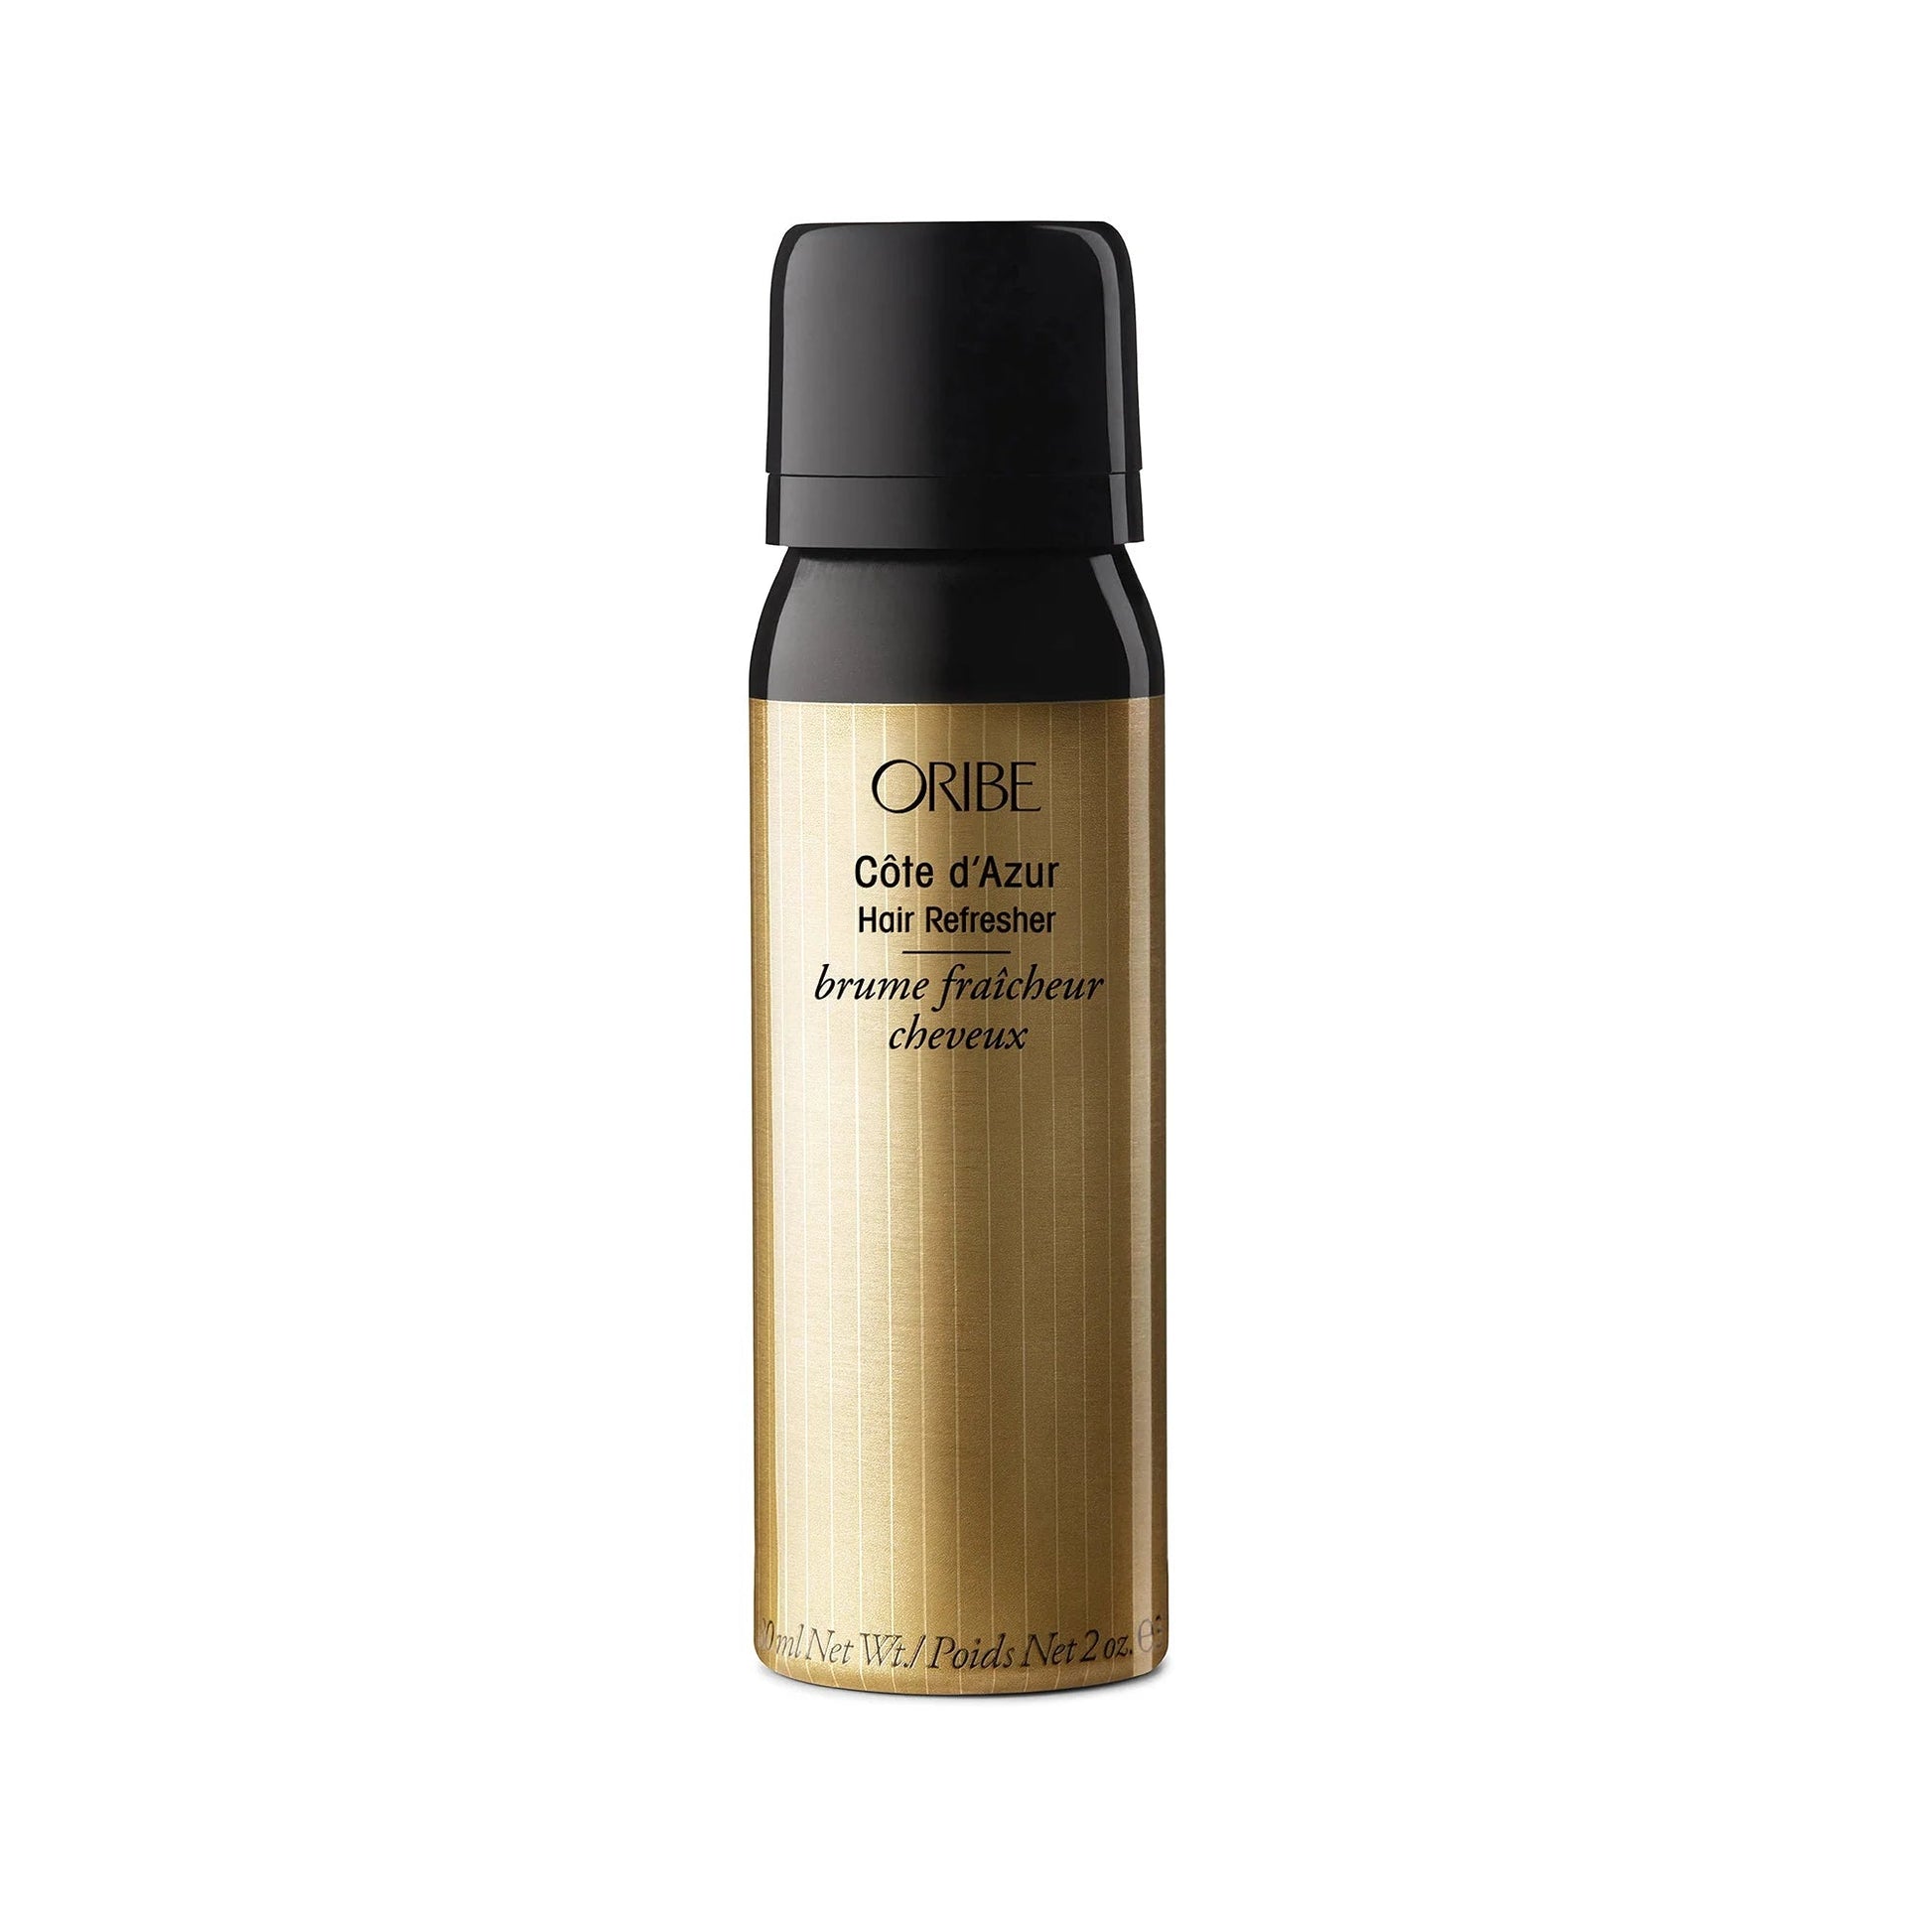 Oribe Cote d'Azur Hair Refresher - shelley and co